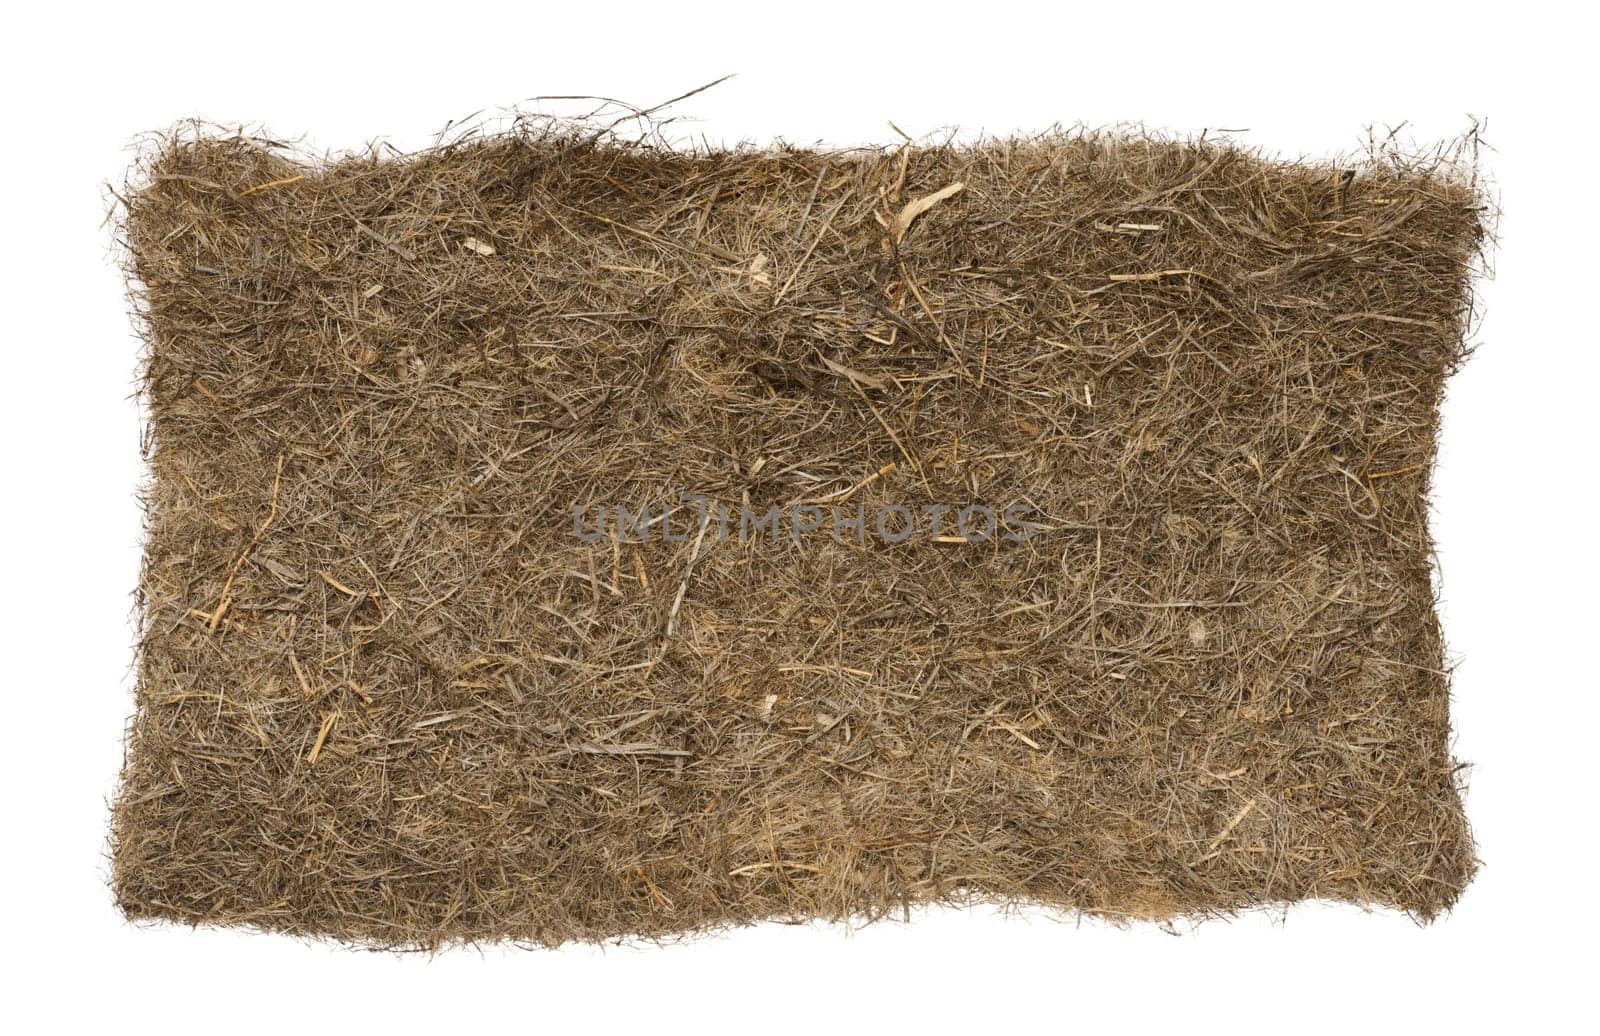 Mat made of jute, hemp and coconut fibers for growing microgreens on an isolated background by ndanko